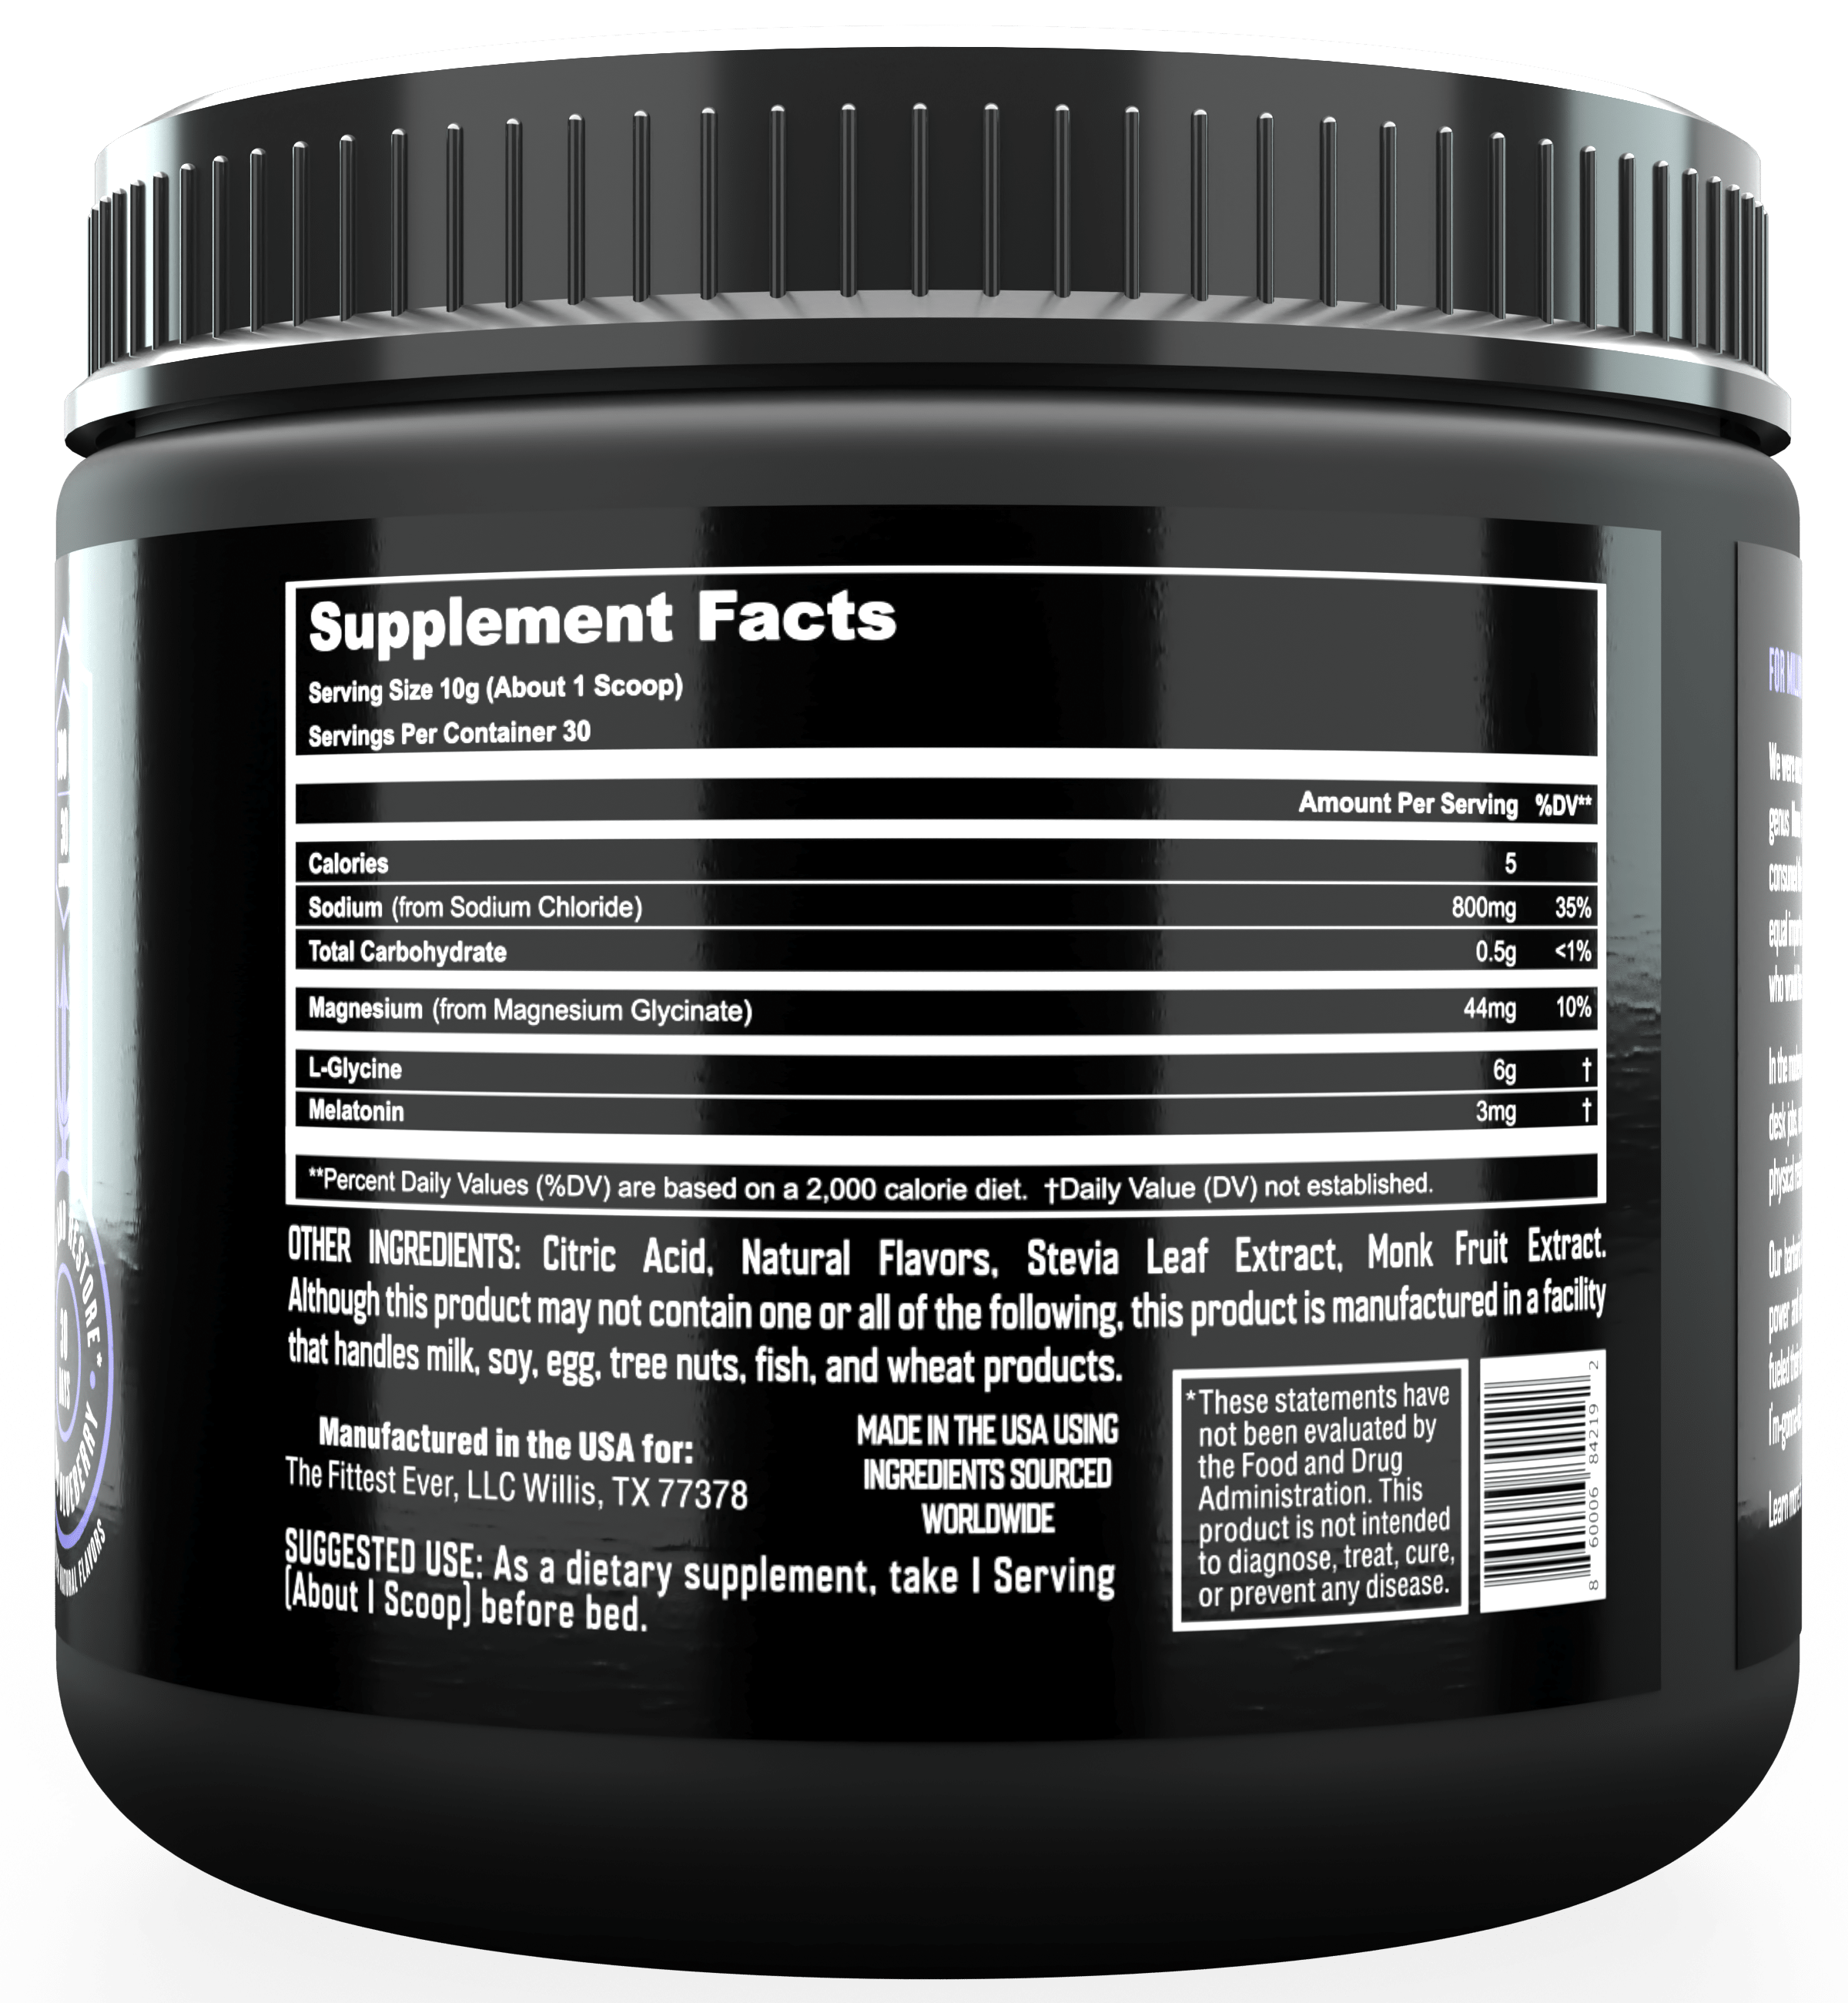 The back of a tub of Rest clearly showing the supplement facts panel and ingredient Sodium magnesium  l-glycine and melatonin